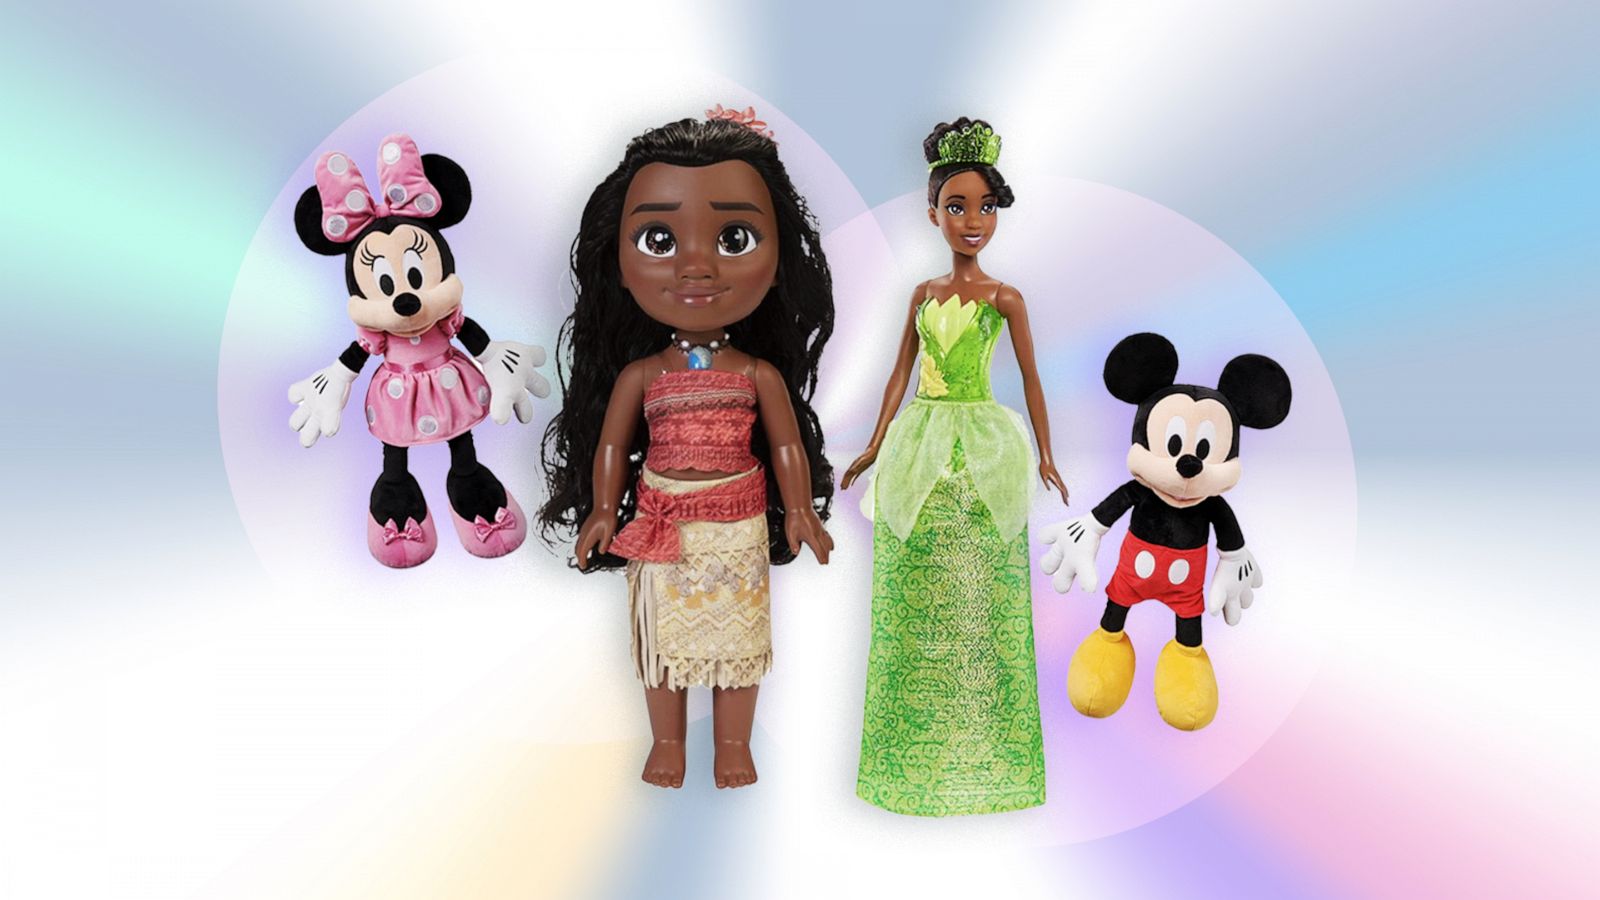 Celebrate 'Wonder Wednesday' with new Disney products - Good Morning America